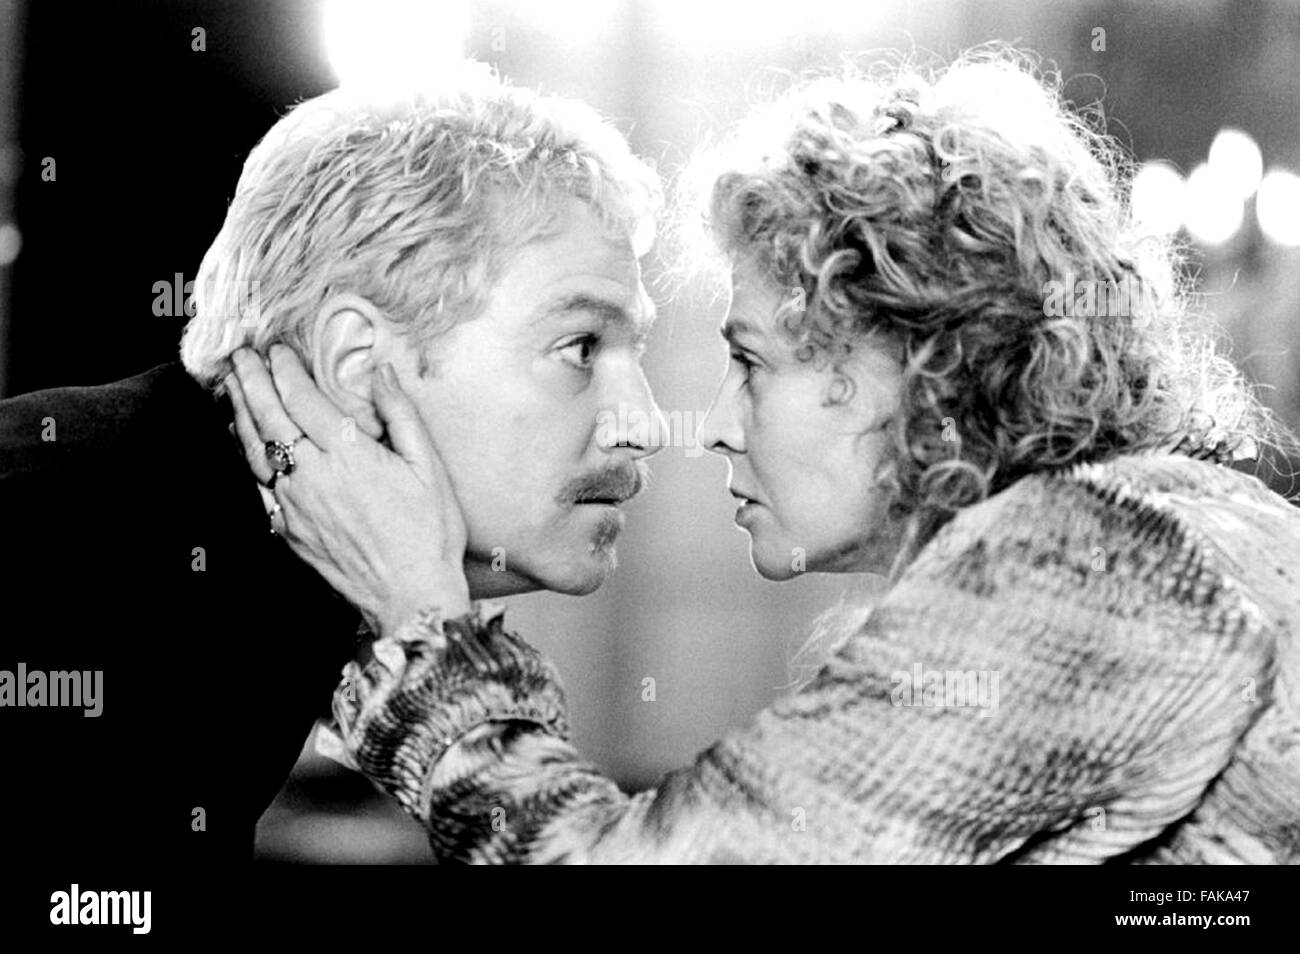 HAMLET 1996 Castle Rock film with Julie Christie and Kenneth Branagh ...